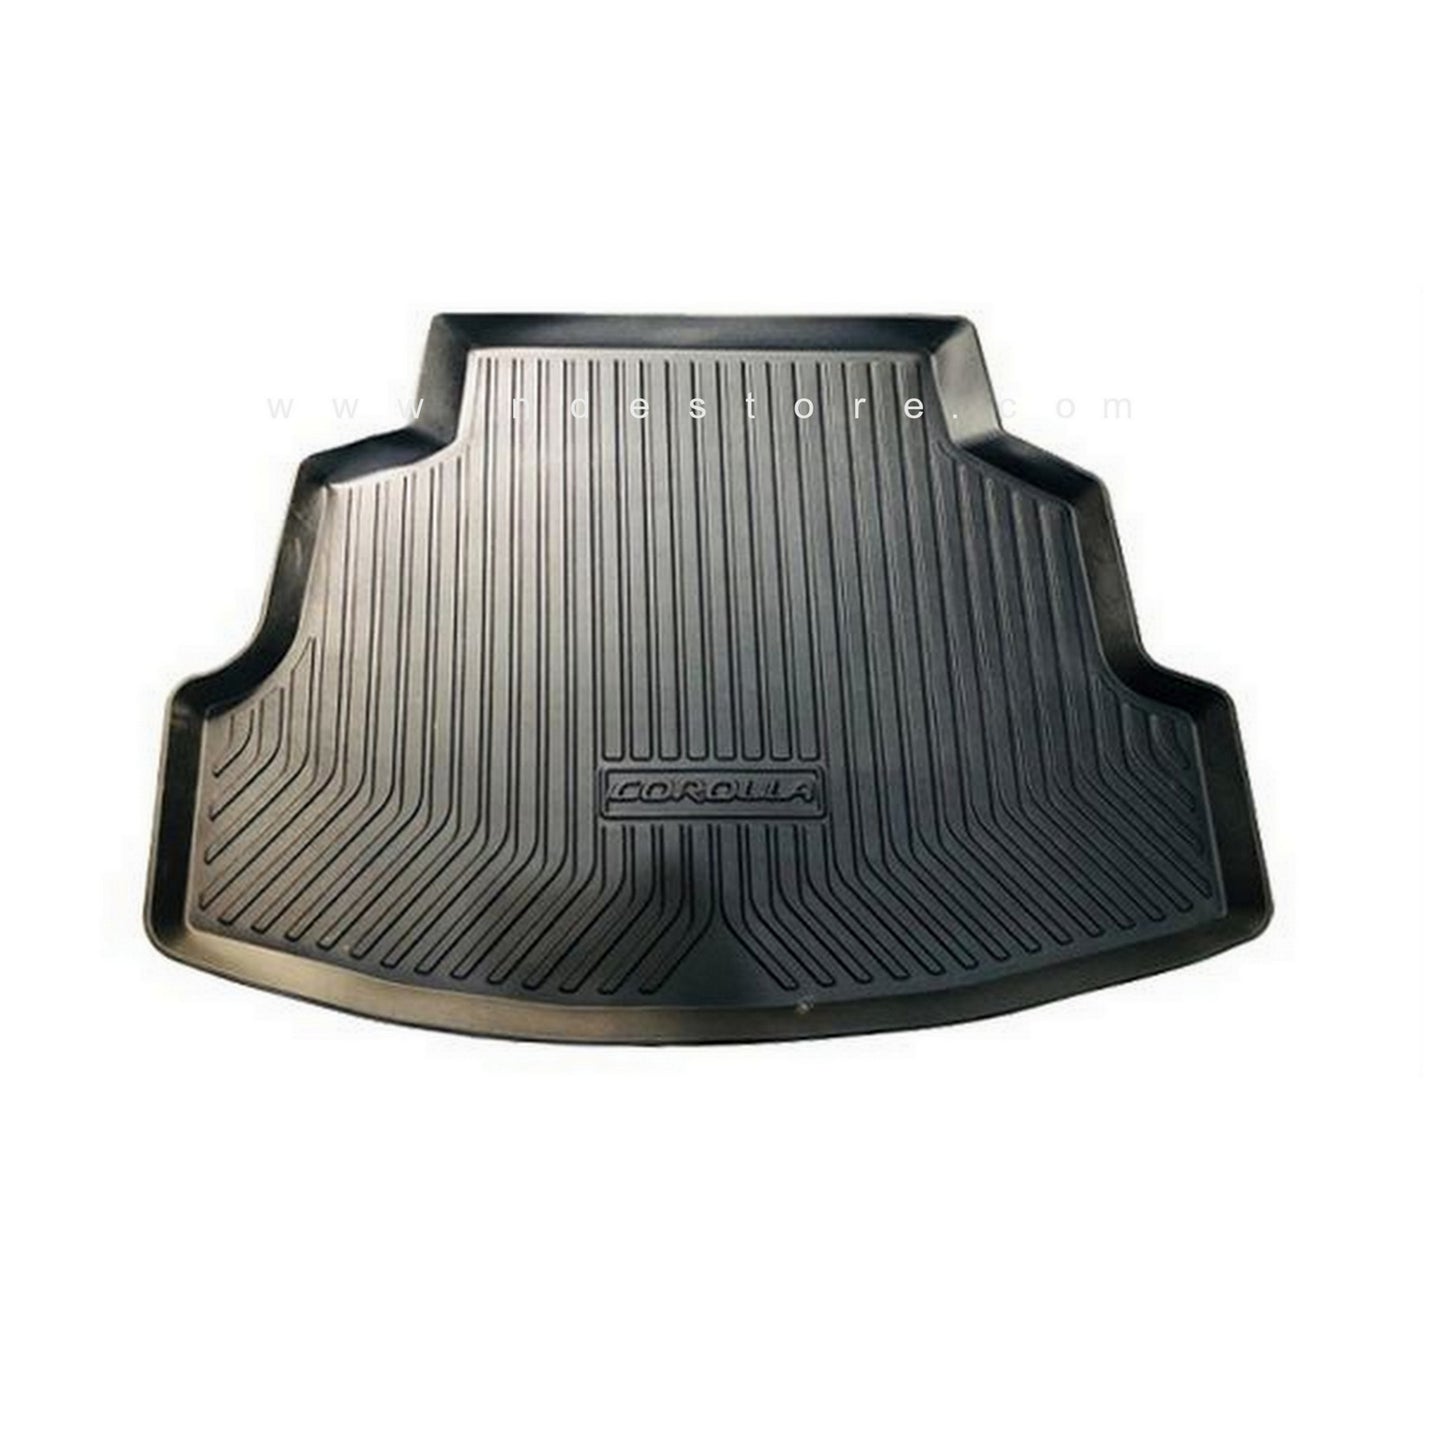 TRUNK TRAY FOR TOYOTA COROLLA